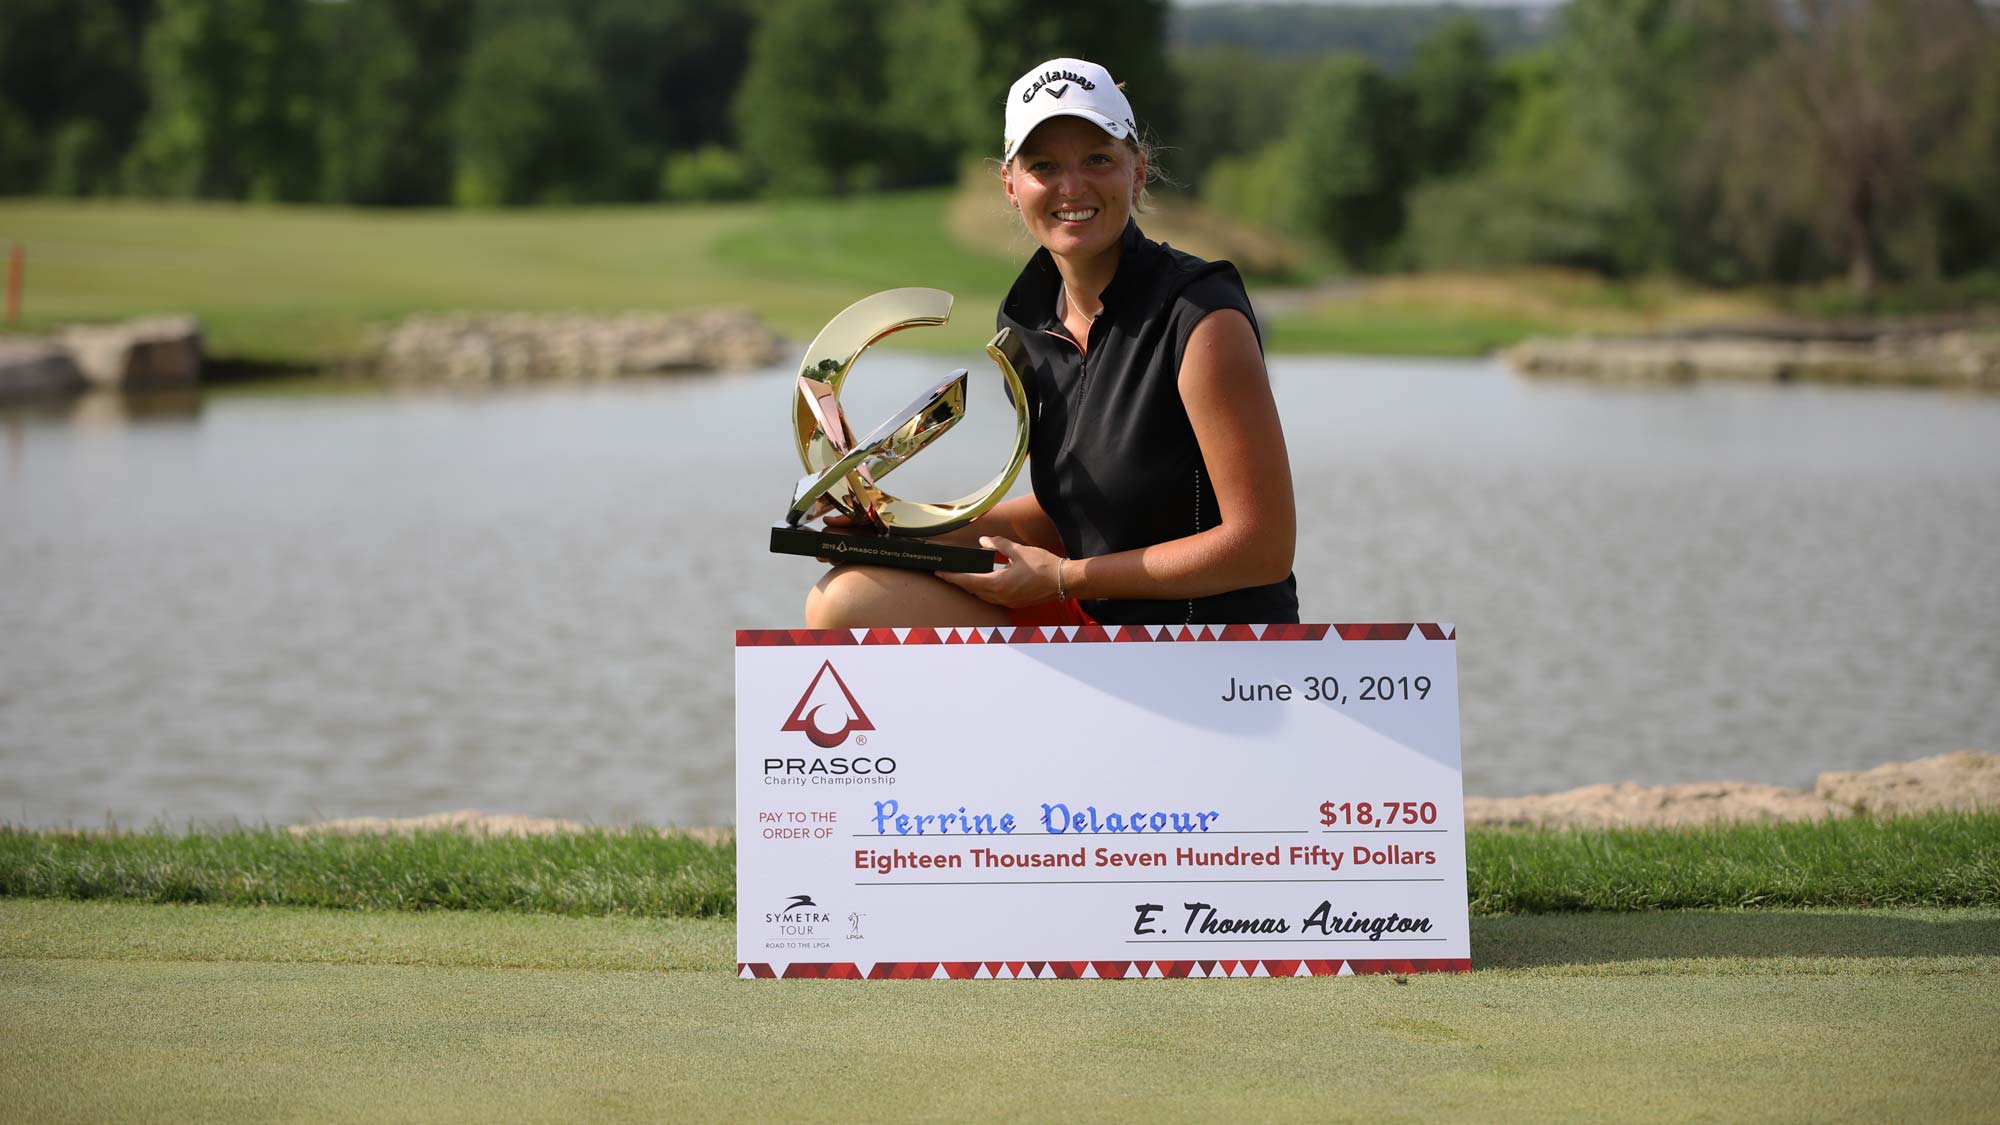 Perrine Delacour with check and trophy